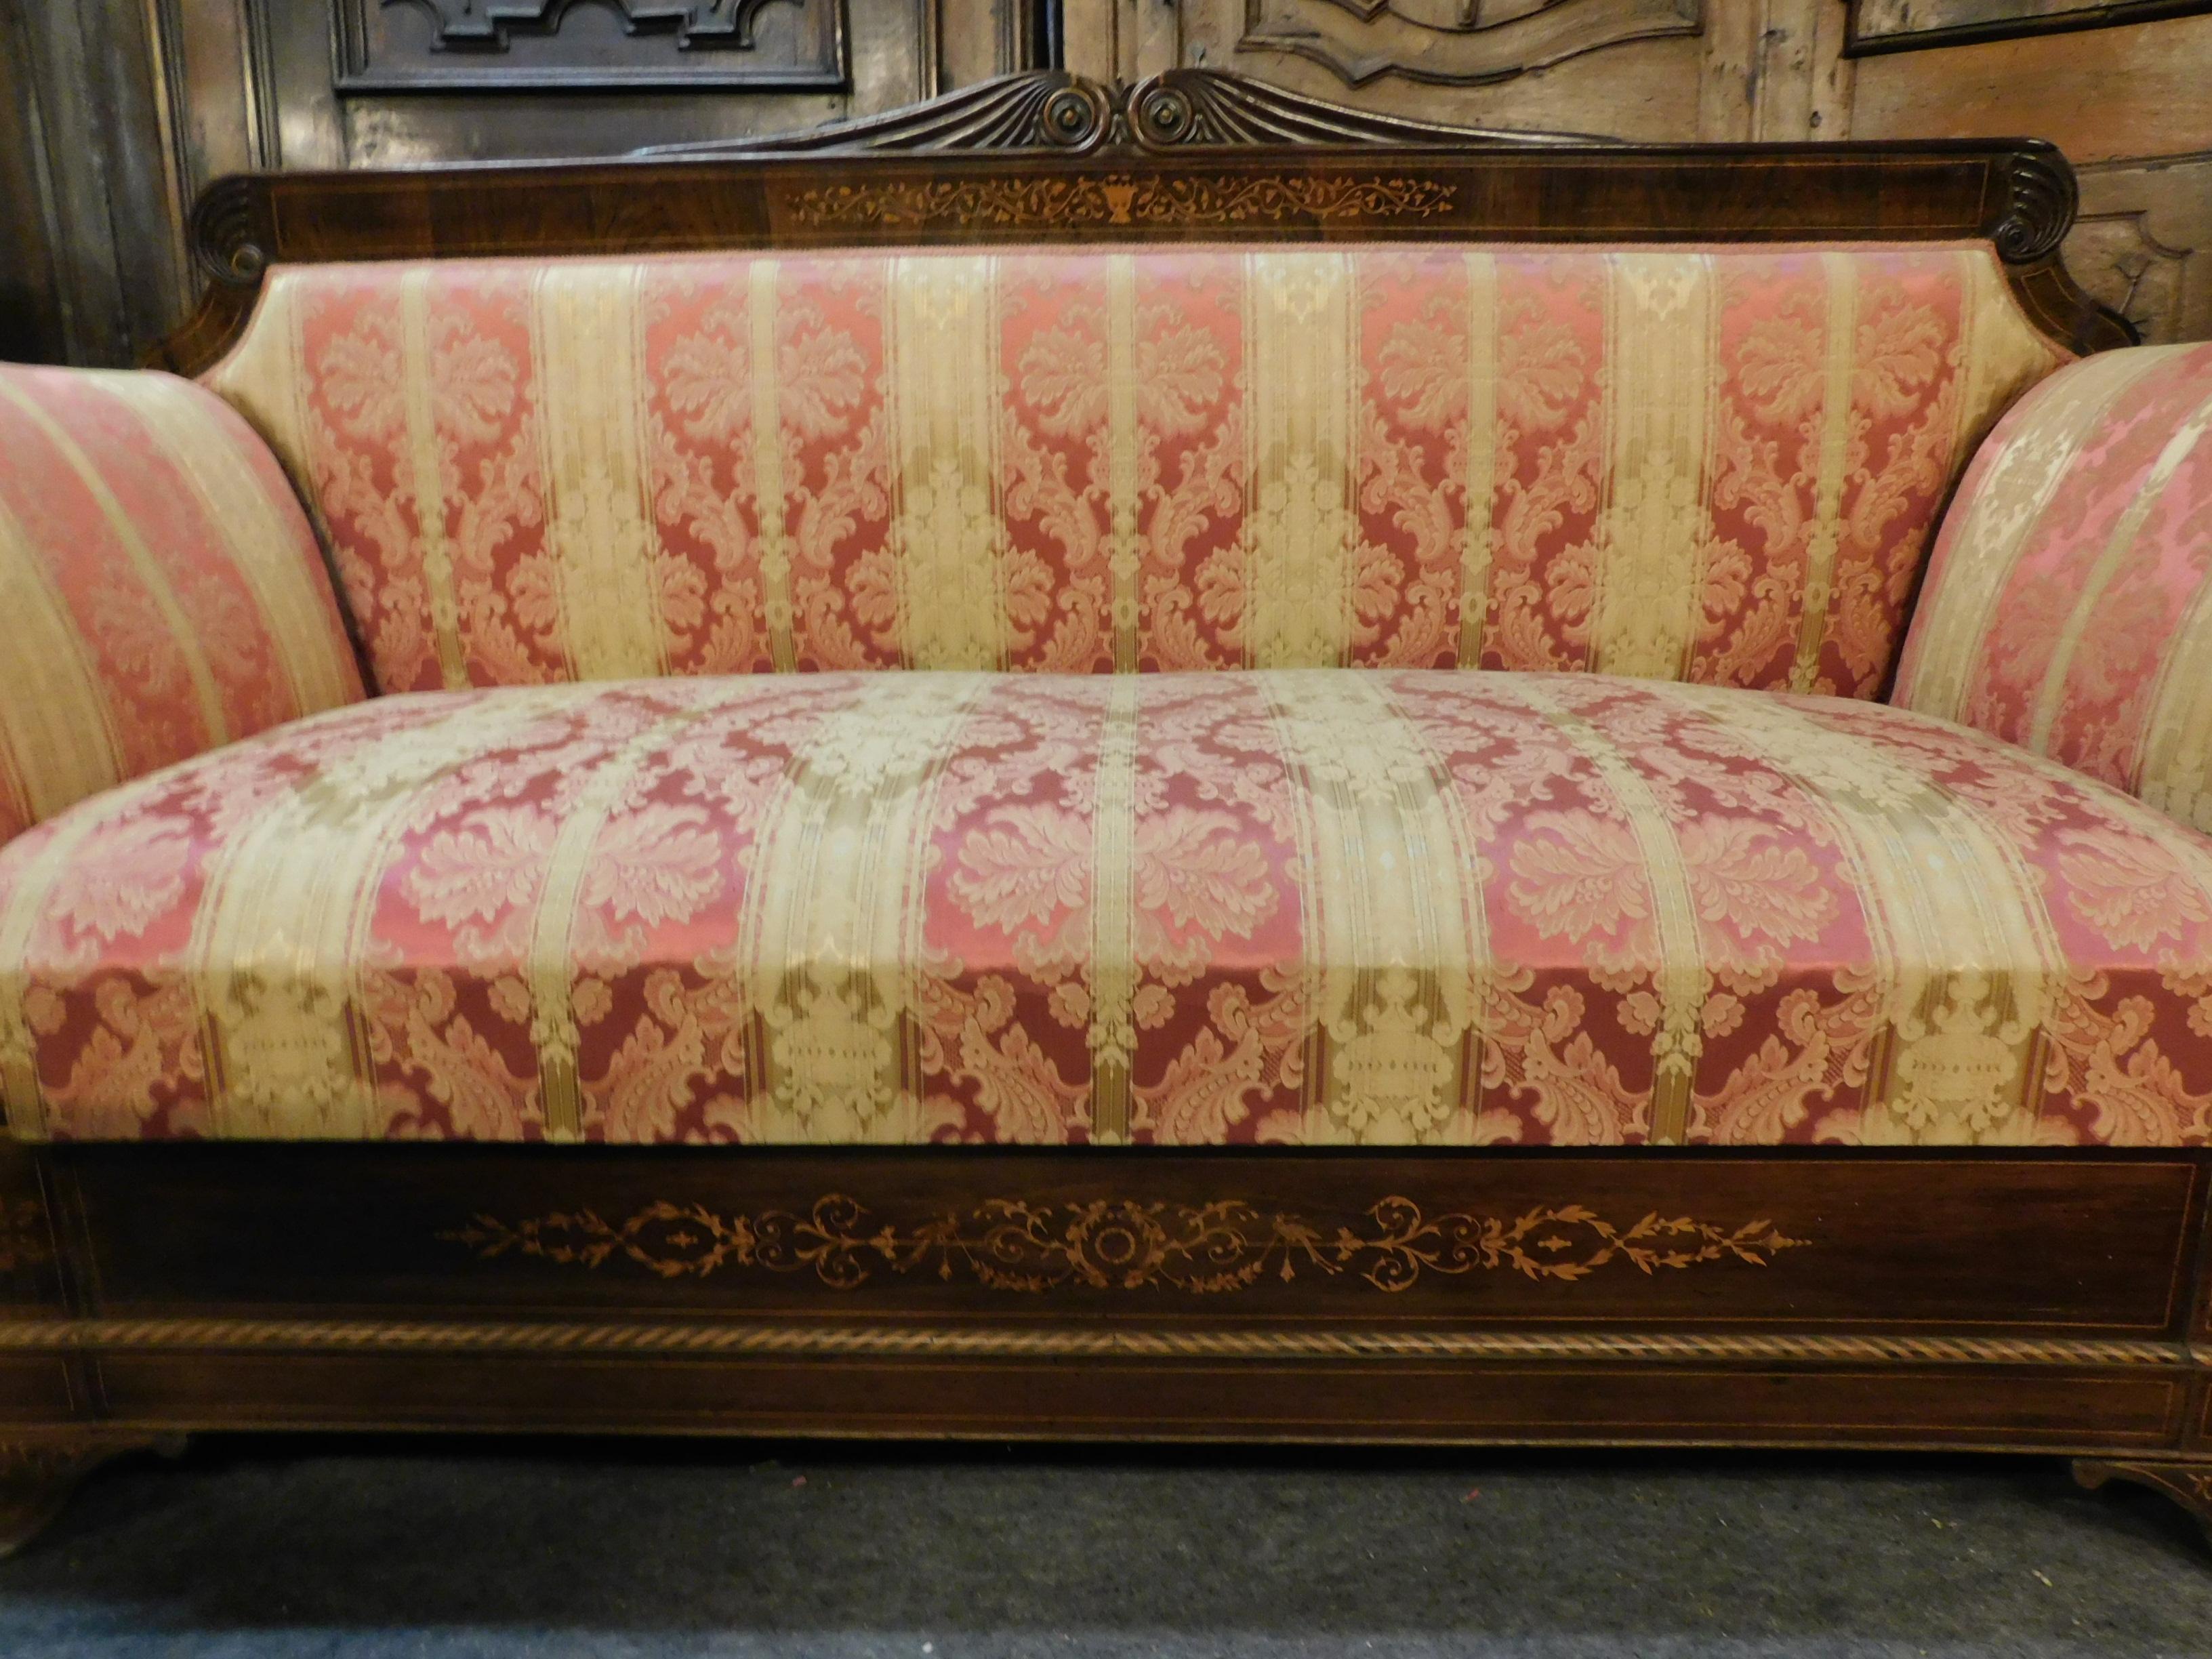 Antique sofa in walnut inlaid with light and dark, striped yellow and red damask fabric, Carlo X style, comes from Italy, built circa 1750.
Important sofa in excellent condition, perfect fabric o textile, a beautiful piece to embellish a living